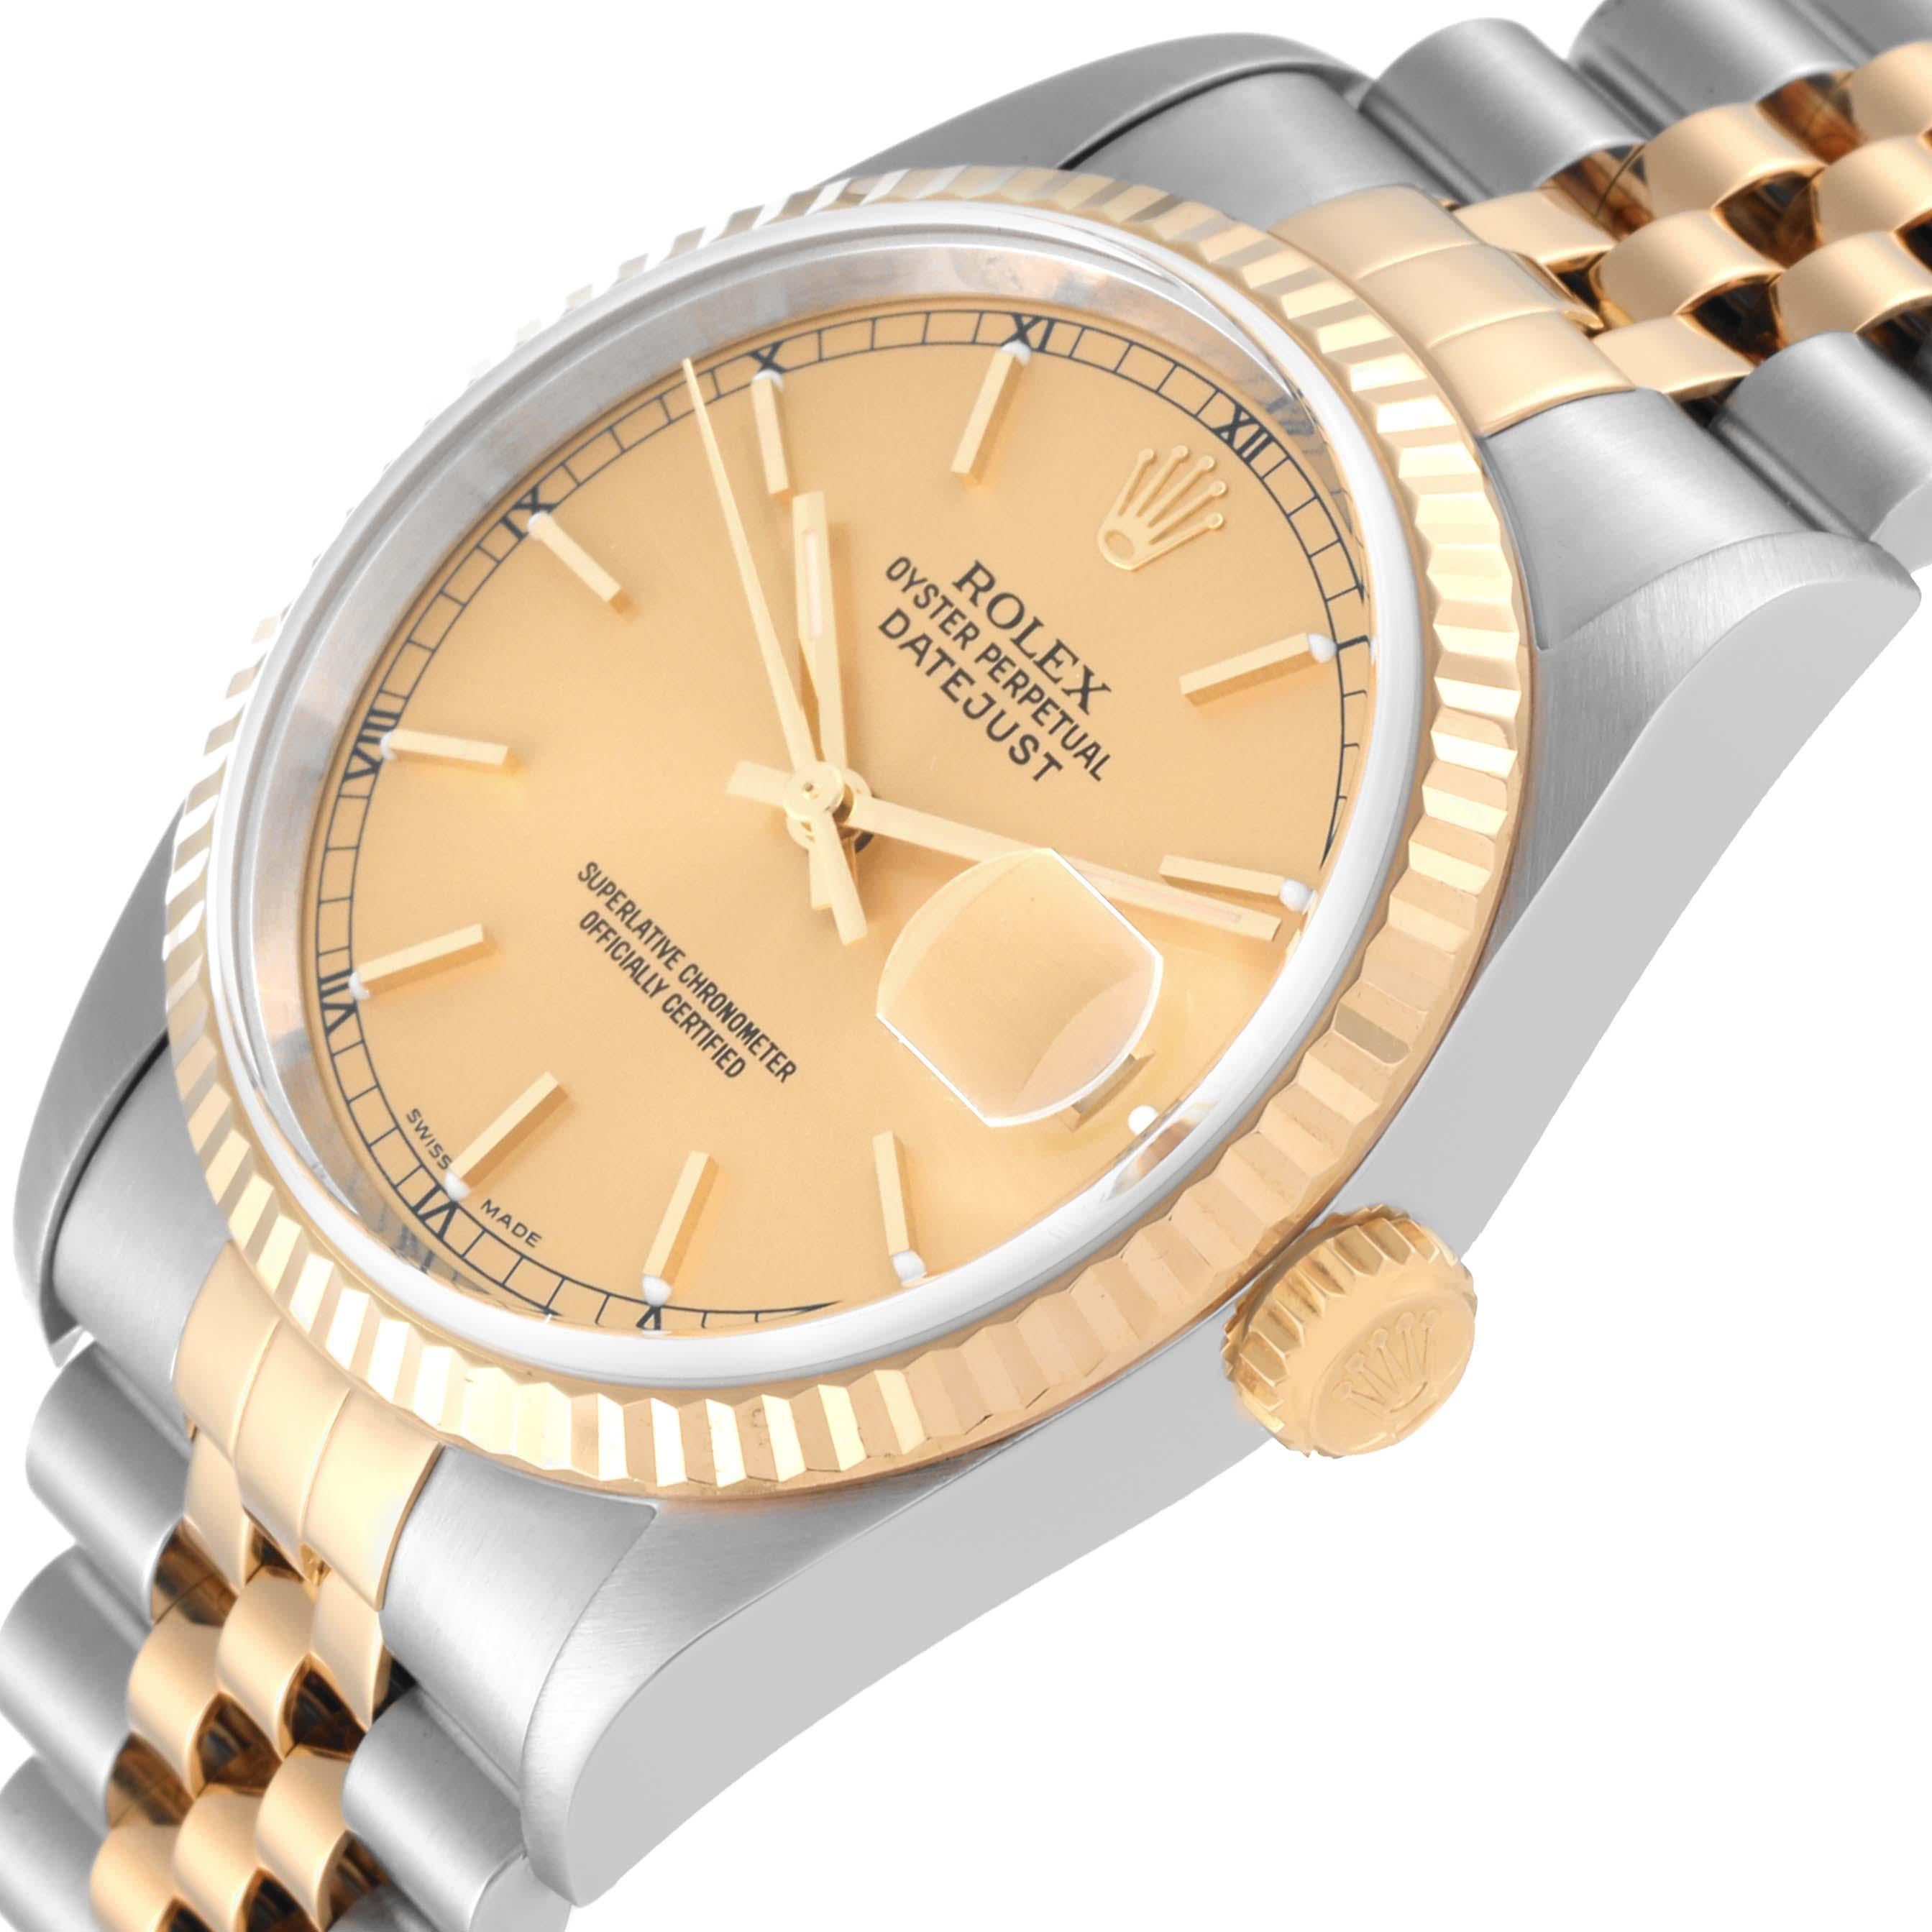 Rolex Datejust 36 Steel Yellow Gold Champagne Dial Mens Watch 16233 Box Papers 1